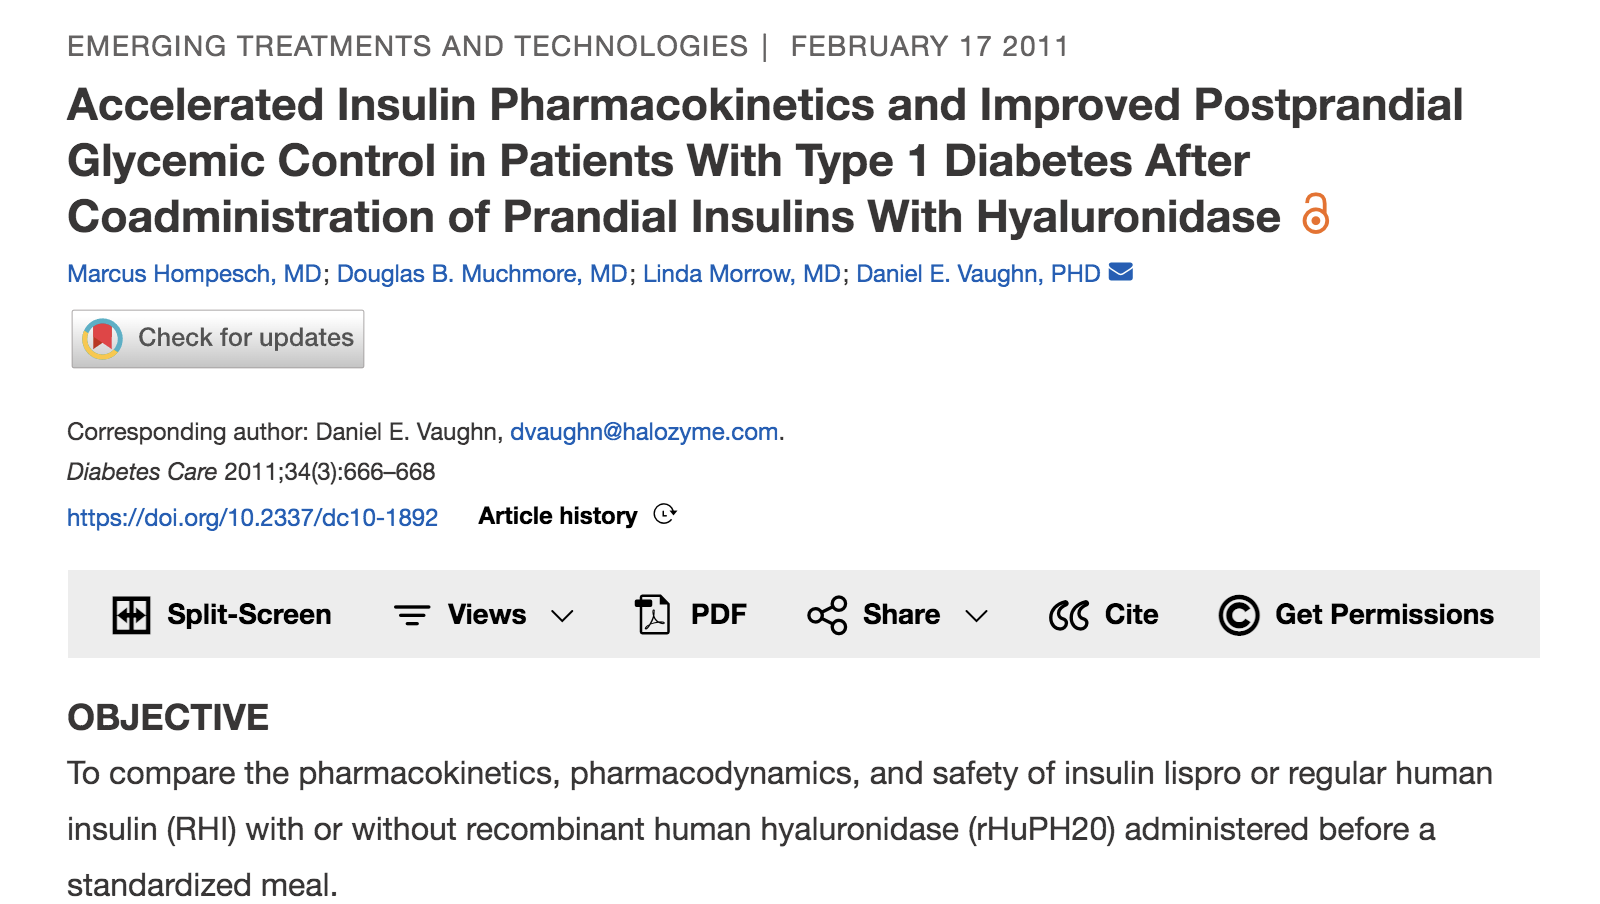 Accelerated insulin pharmacokinetics and improved postprandial glycemic control in patients with type 1 diabetes after coadministration of prandial insulins with hyaluronidase thumbnail